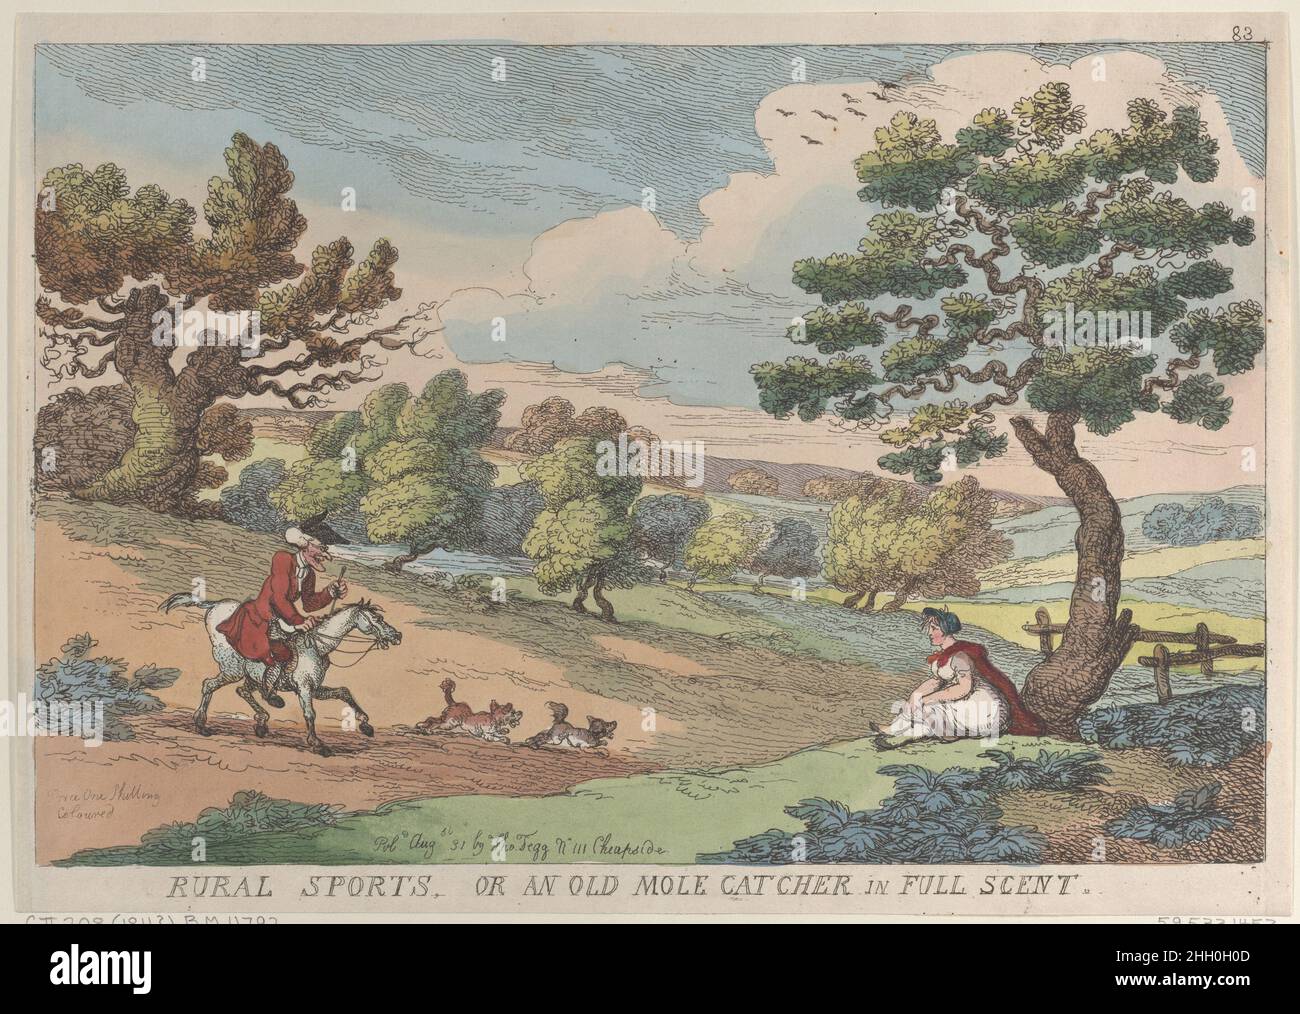 Rural Sports, or an Old Mole Catcher in Full Scent August 31, 1811 Thomas Rowlandson An elderly man on a horse rides in a hilly landscape with two dogs before him, and approaches a girl seated beneath a tree at right.. Rural Sports, or an Old Mole Catcher in Full Scent. Thomas Rowlandson (British, London 1757–1827 London). August 31, 1811. Hand-colored etching. Thomas Tegg (British, 1776–1846). Prints Stock Photo